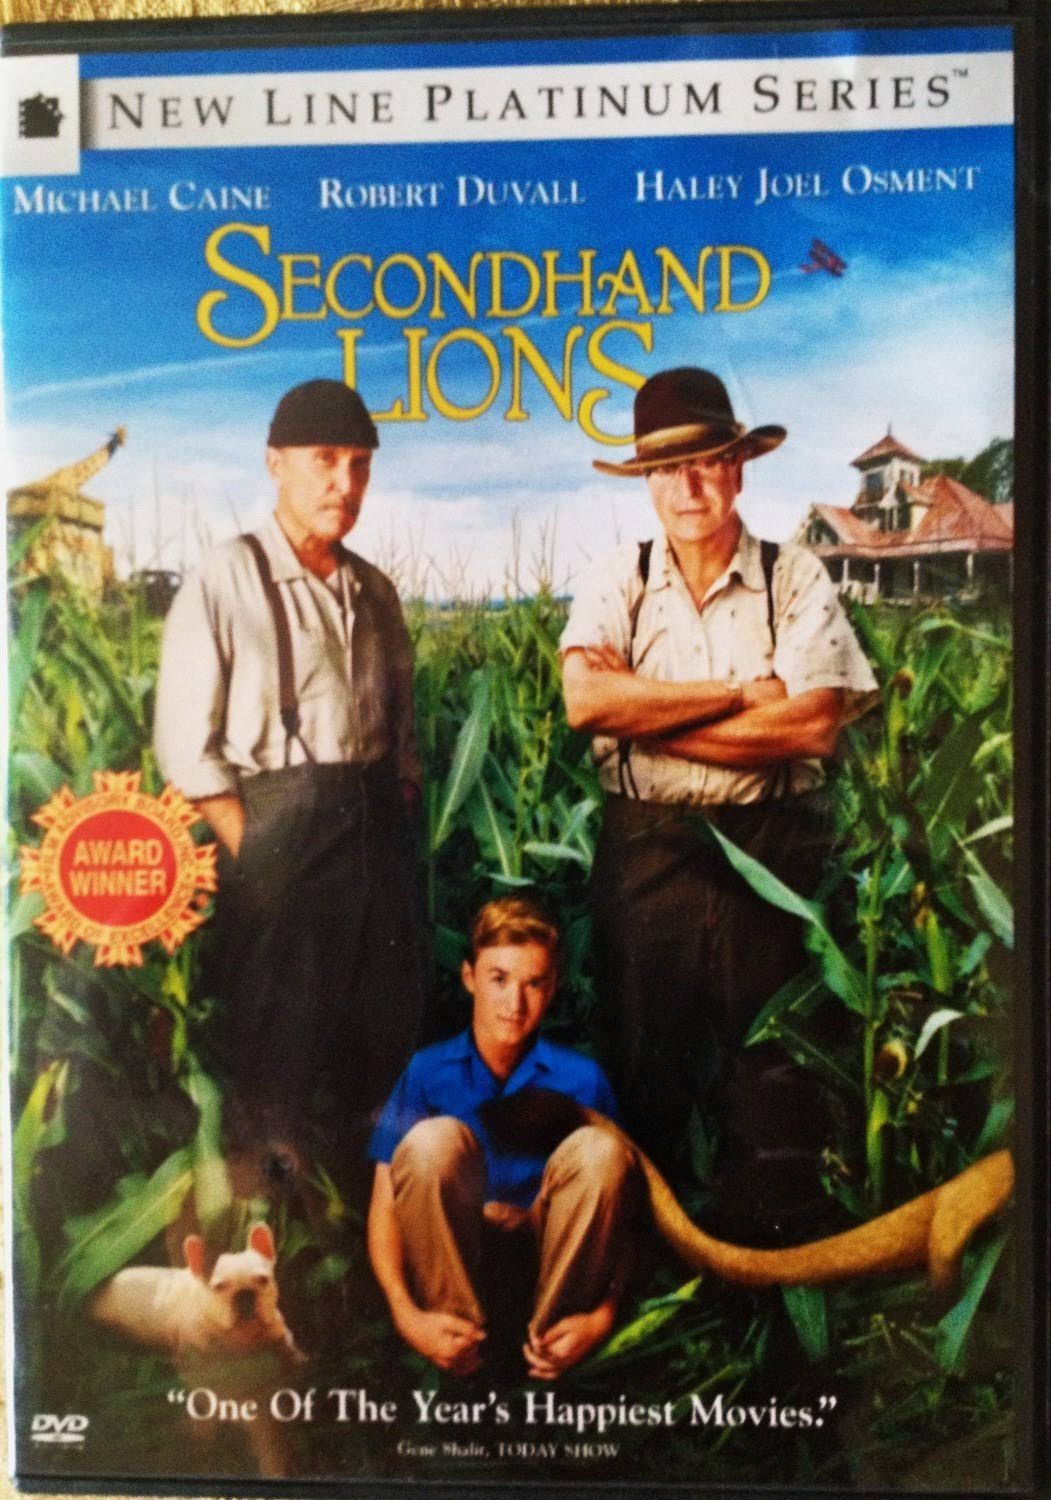 Secondhand Lions - DVD